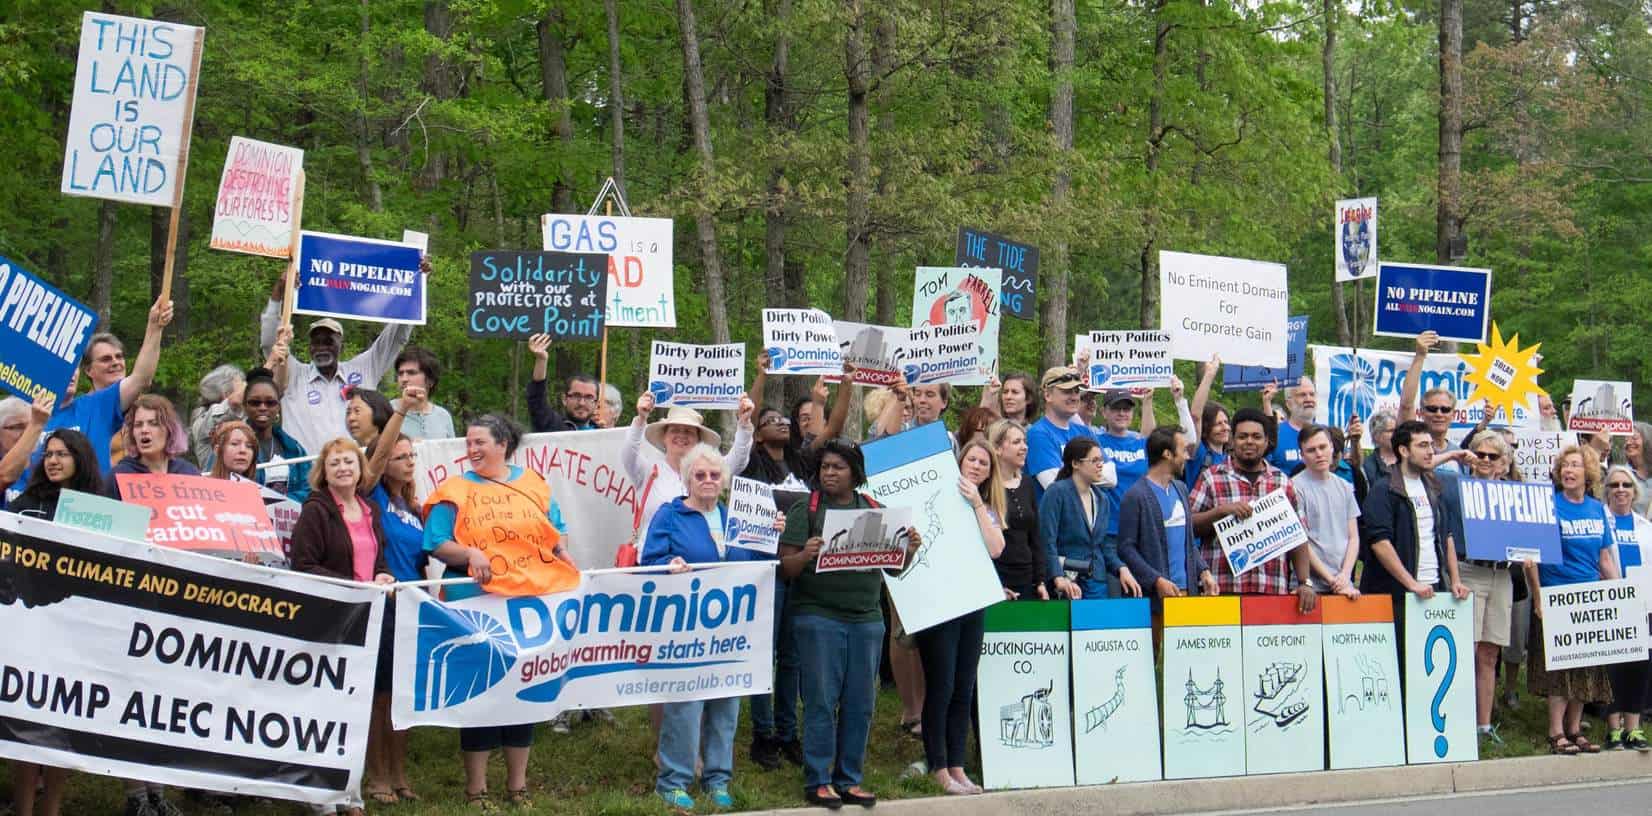 Protesters rallying against Dominion's proposed Atlantic Coast pipeline. Credit: Chesapeake Climate Action Network.